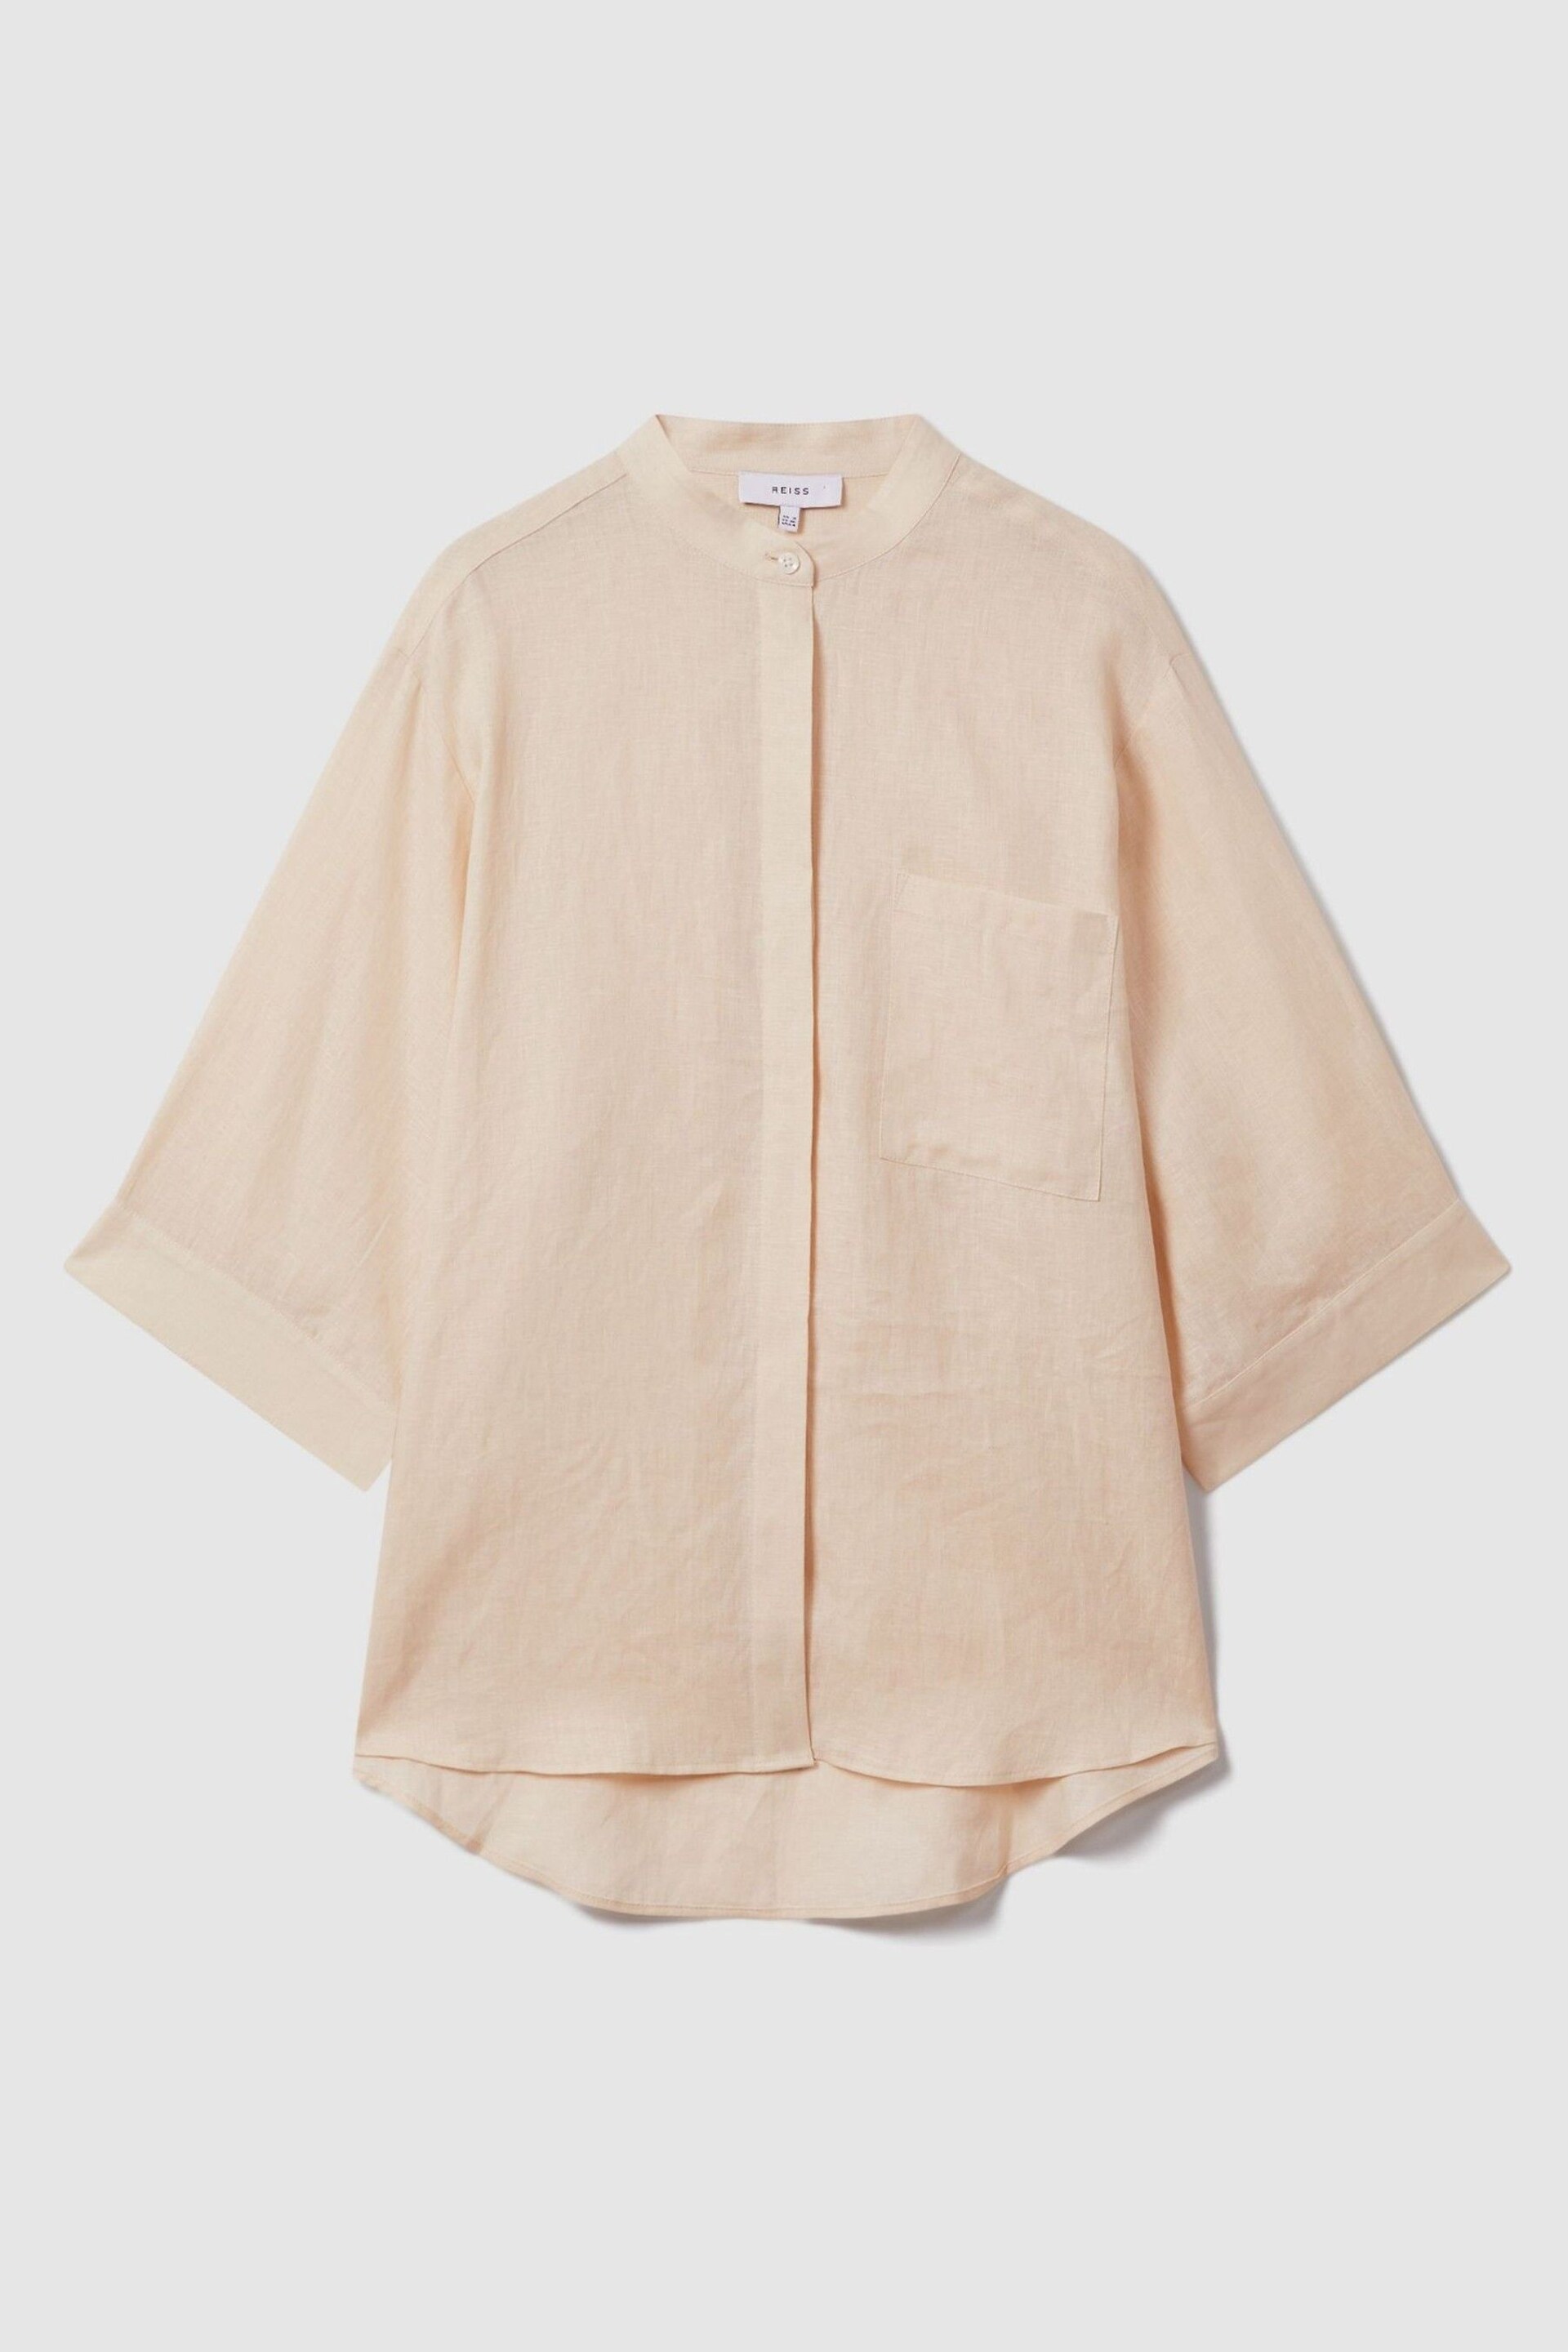 Reiss Blush Winona Relaxed Sleeve Linen Shirt - Image 2 of 6